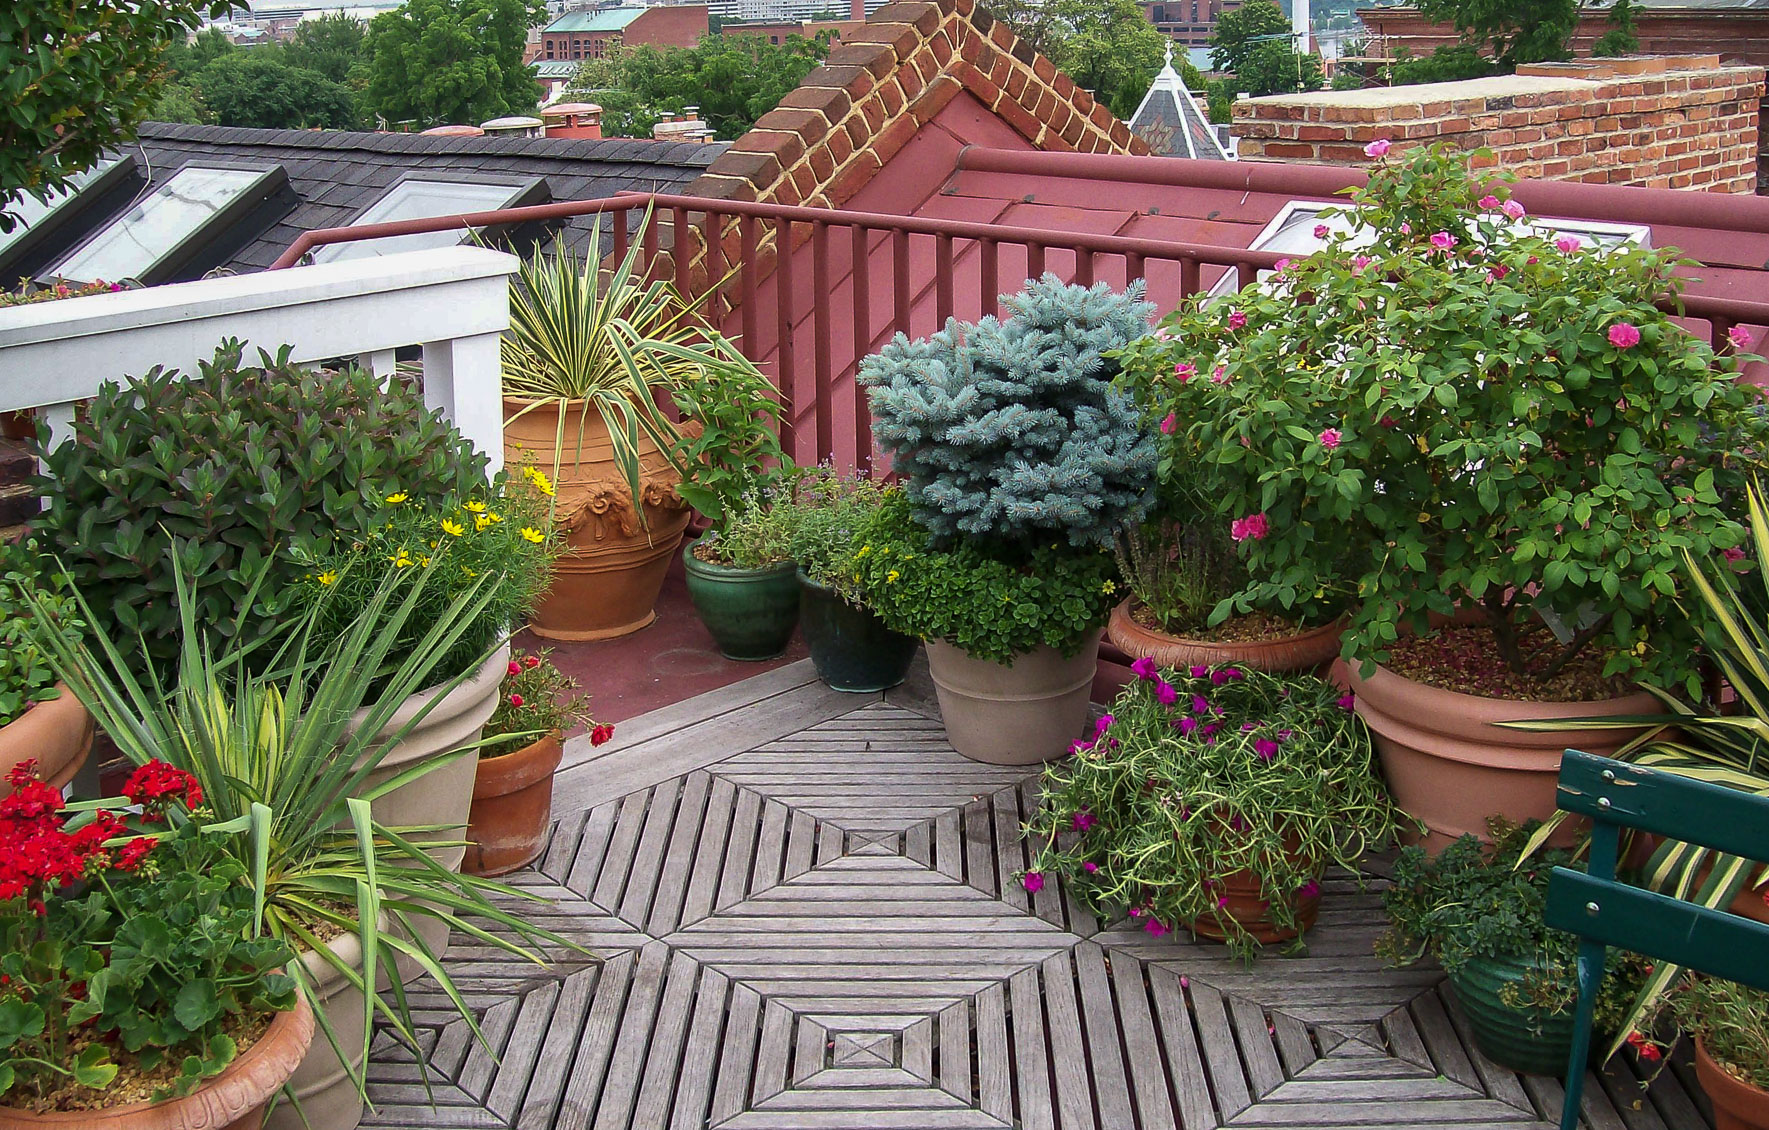 The 'entrance' to the garden, from the stairs, is well-planted and colorful. : Rooftop and Balcony Gardens : CITYSCAPES® Landscaping Inc.